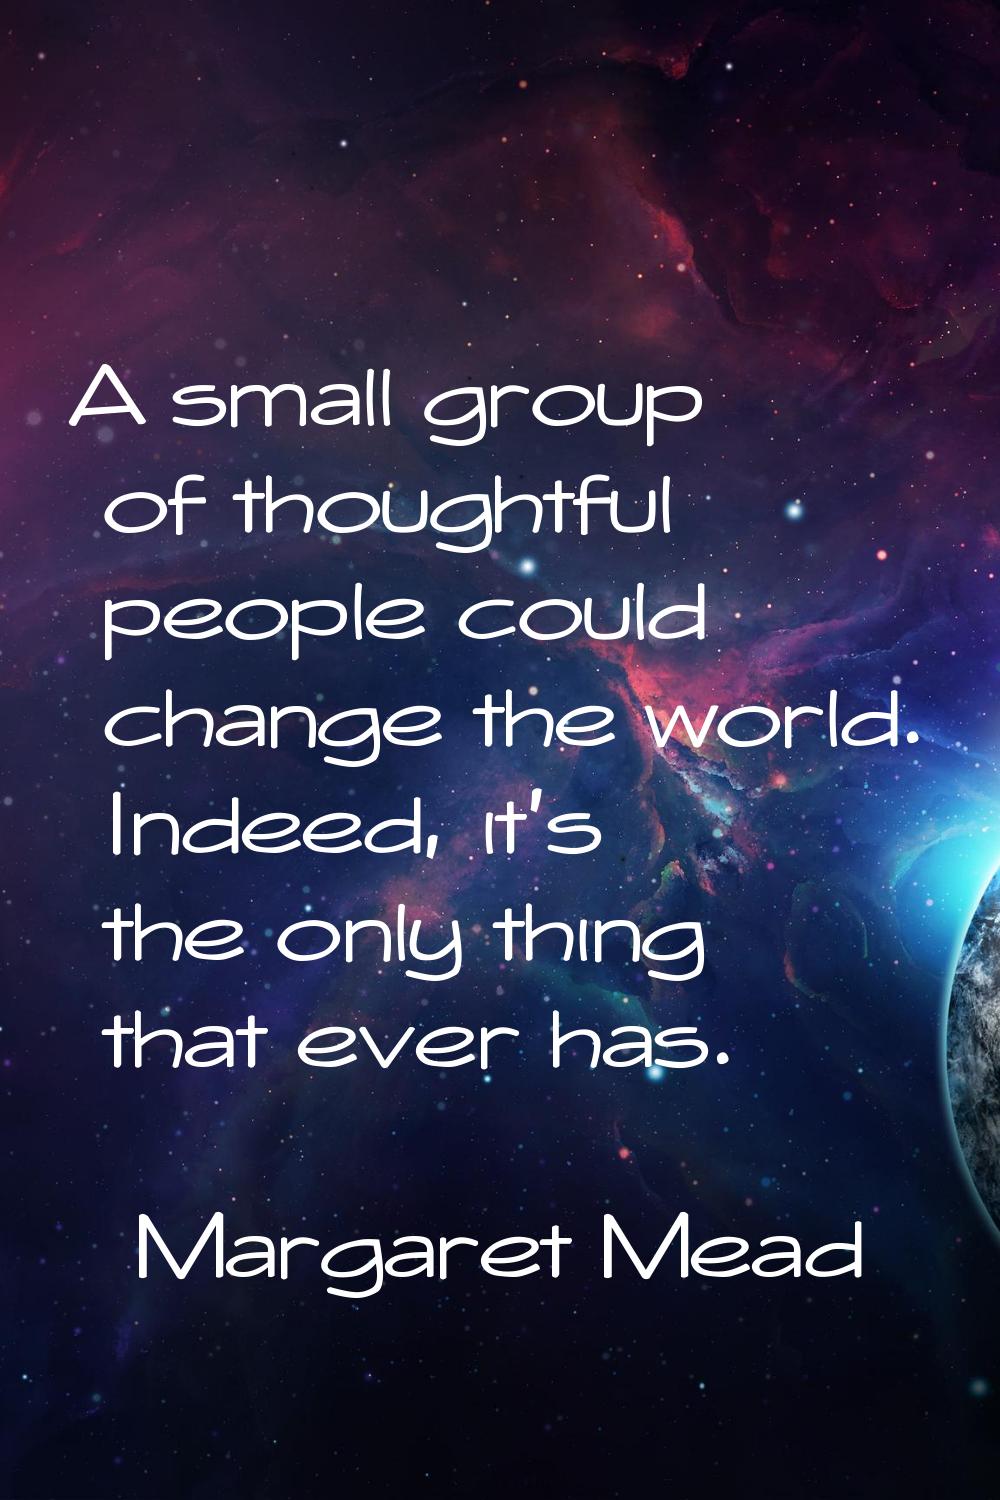 A small group of thoughtful people could change the world. Indeed, it's the only thing that ever ha